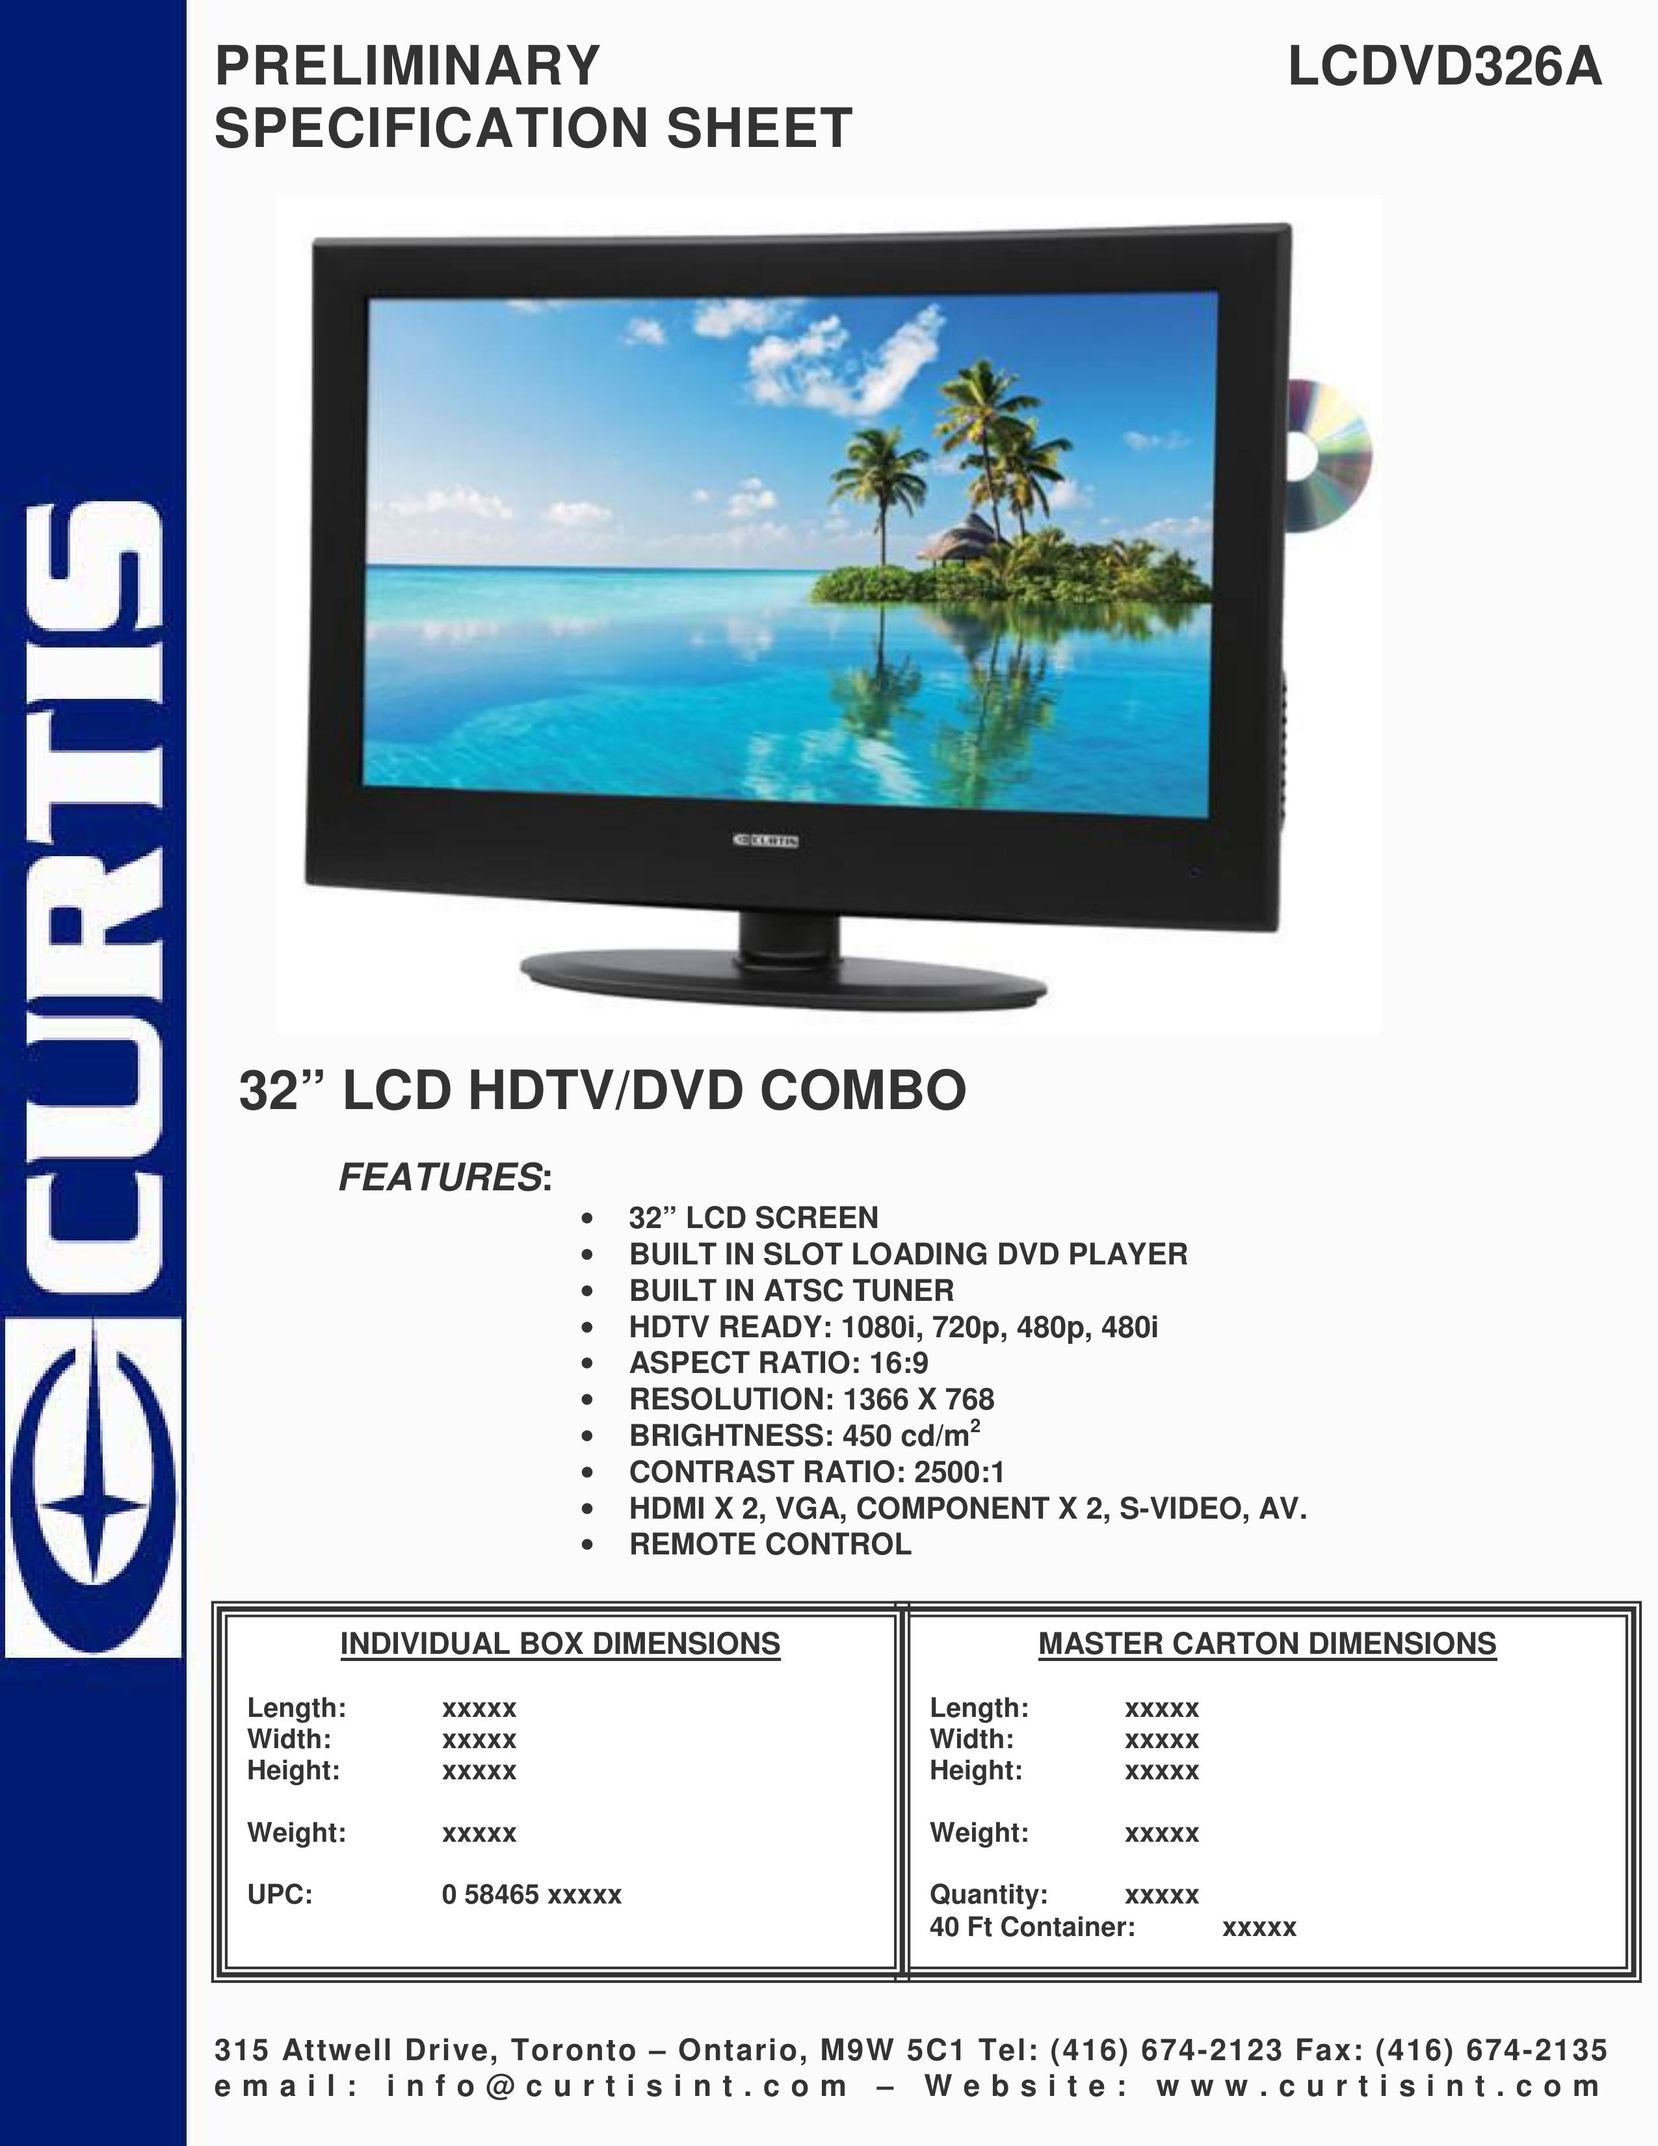 Curtis LCDVD326A Flat Panel Television User Manual